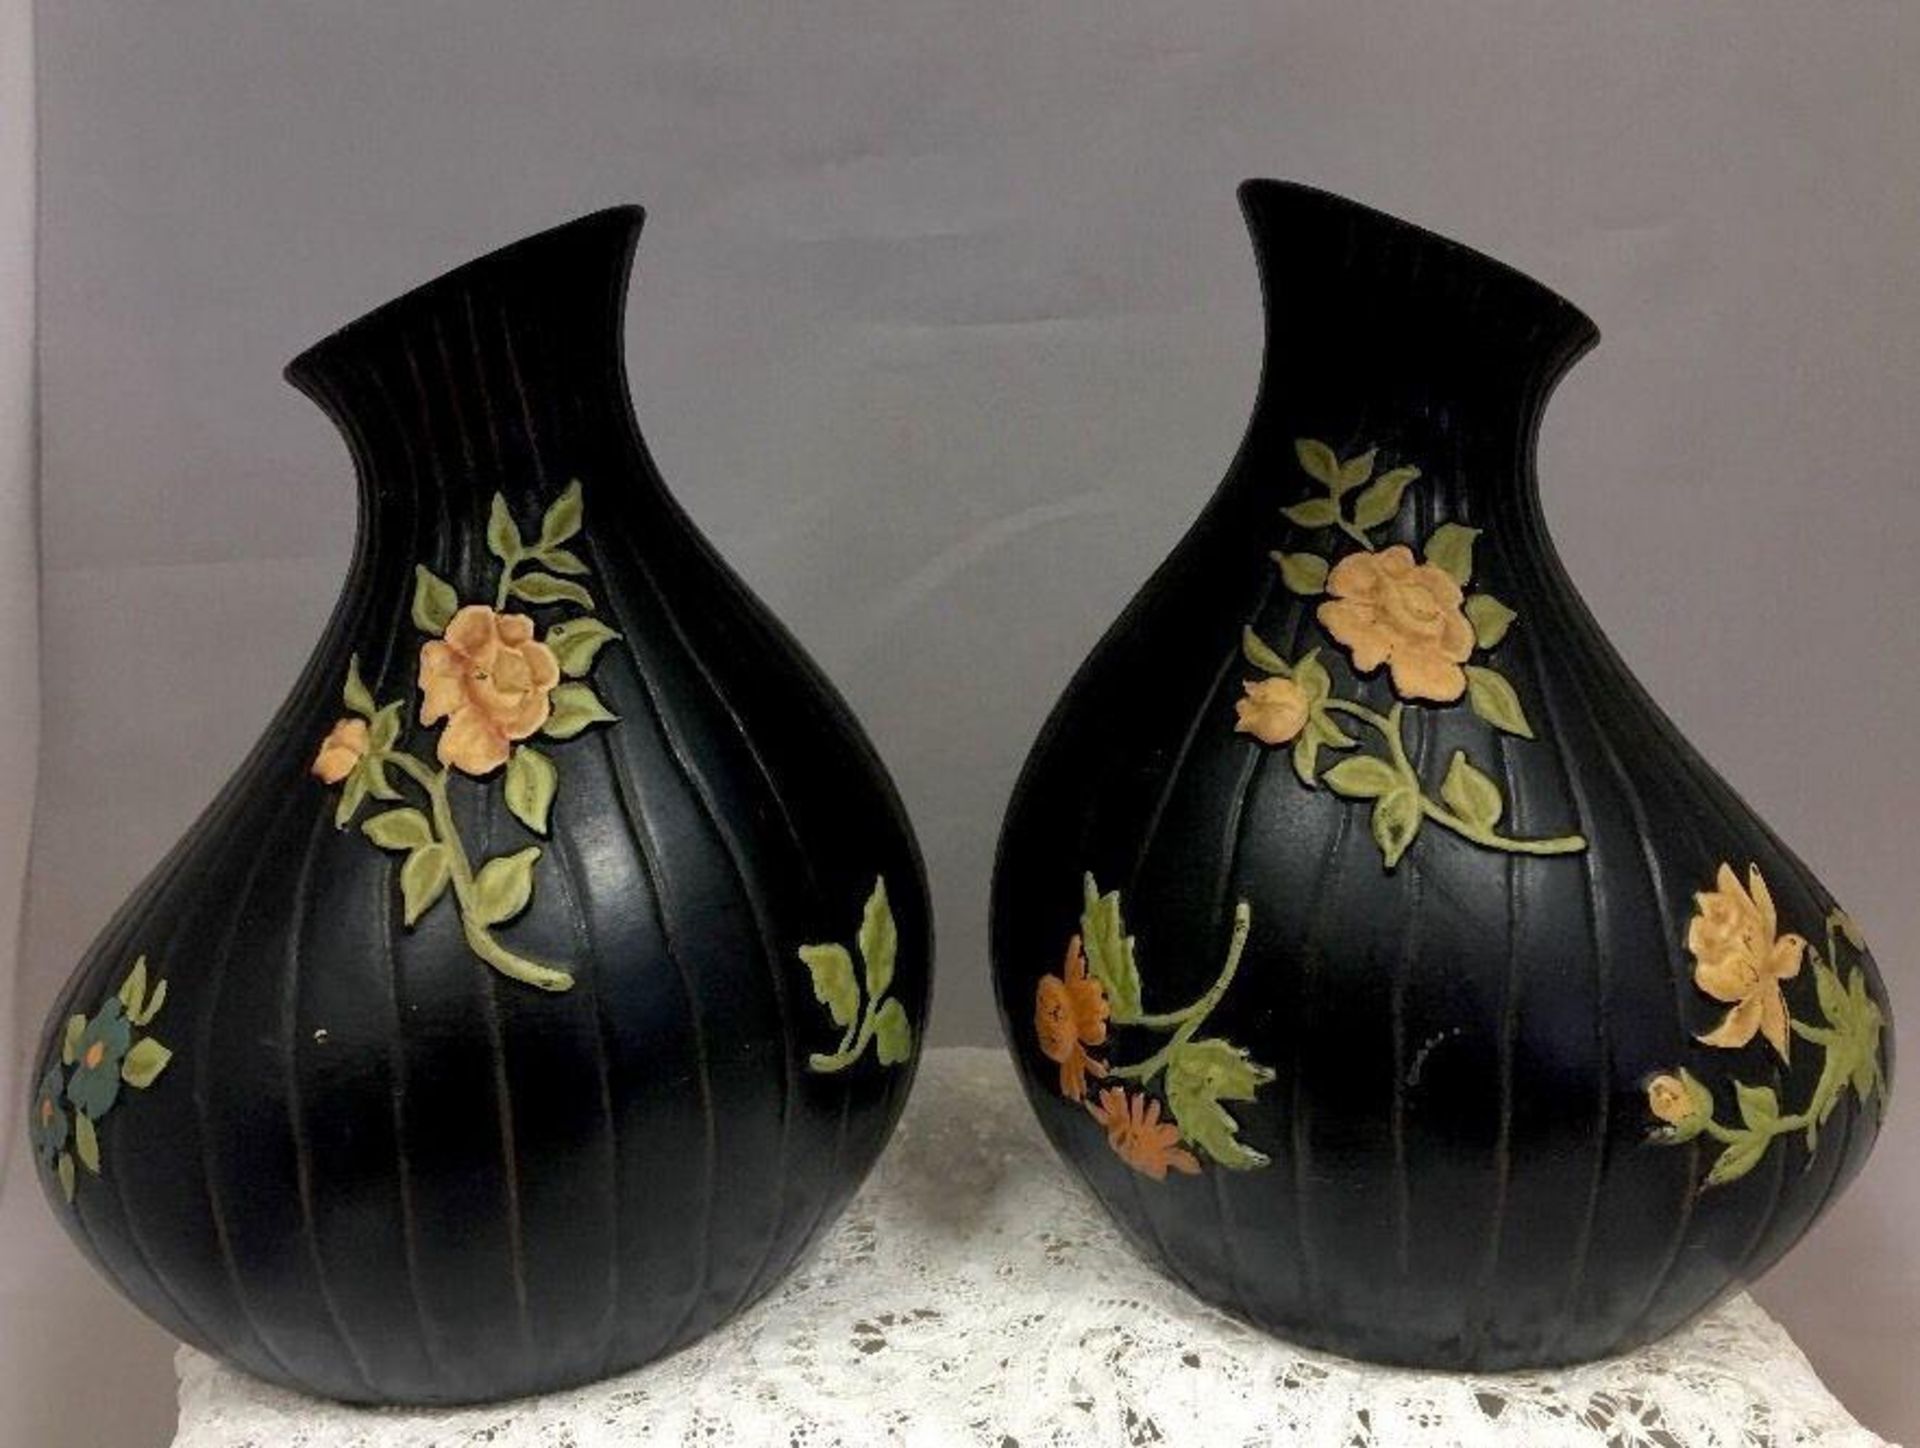 Art Deco pair of Brentleigh Ware vases, foliate on black ground. Good condition with no chips or